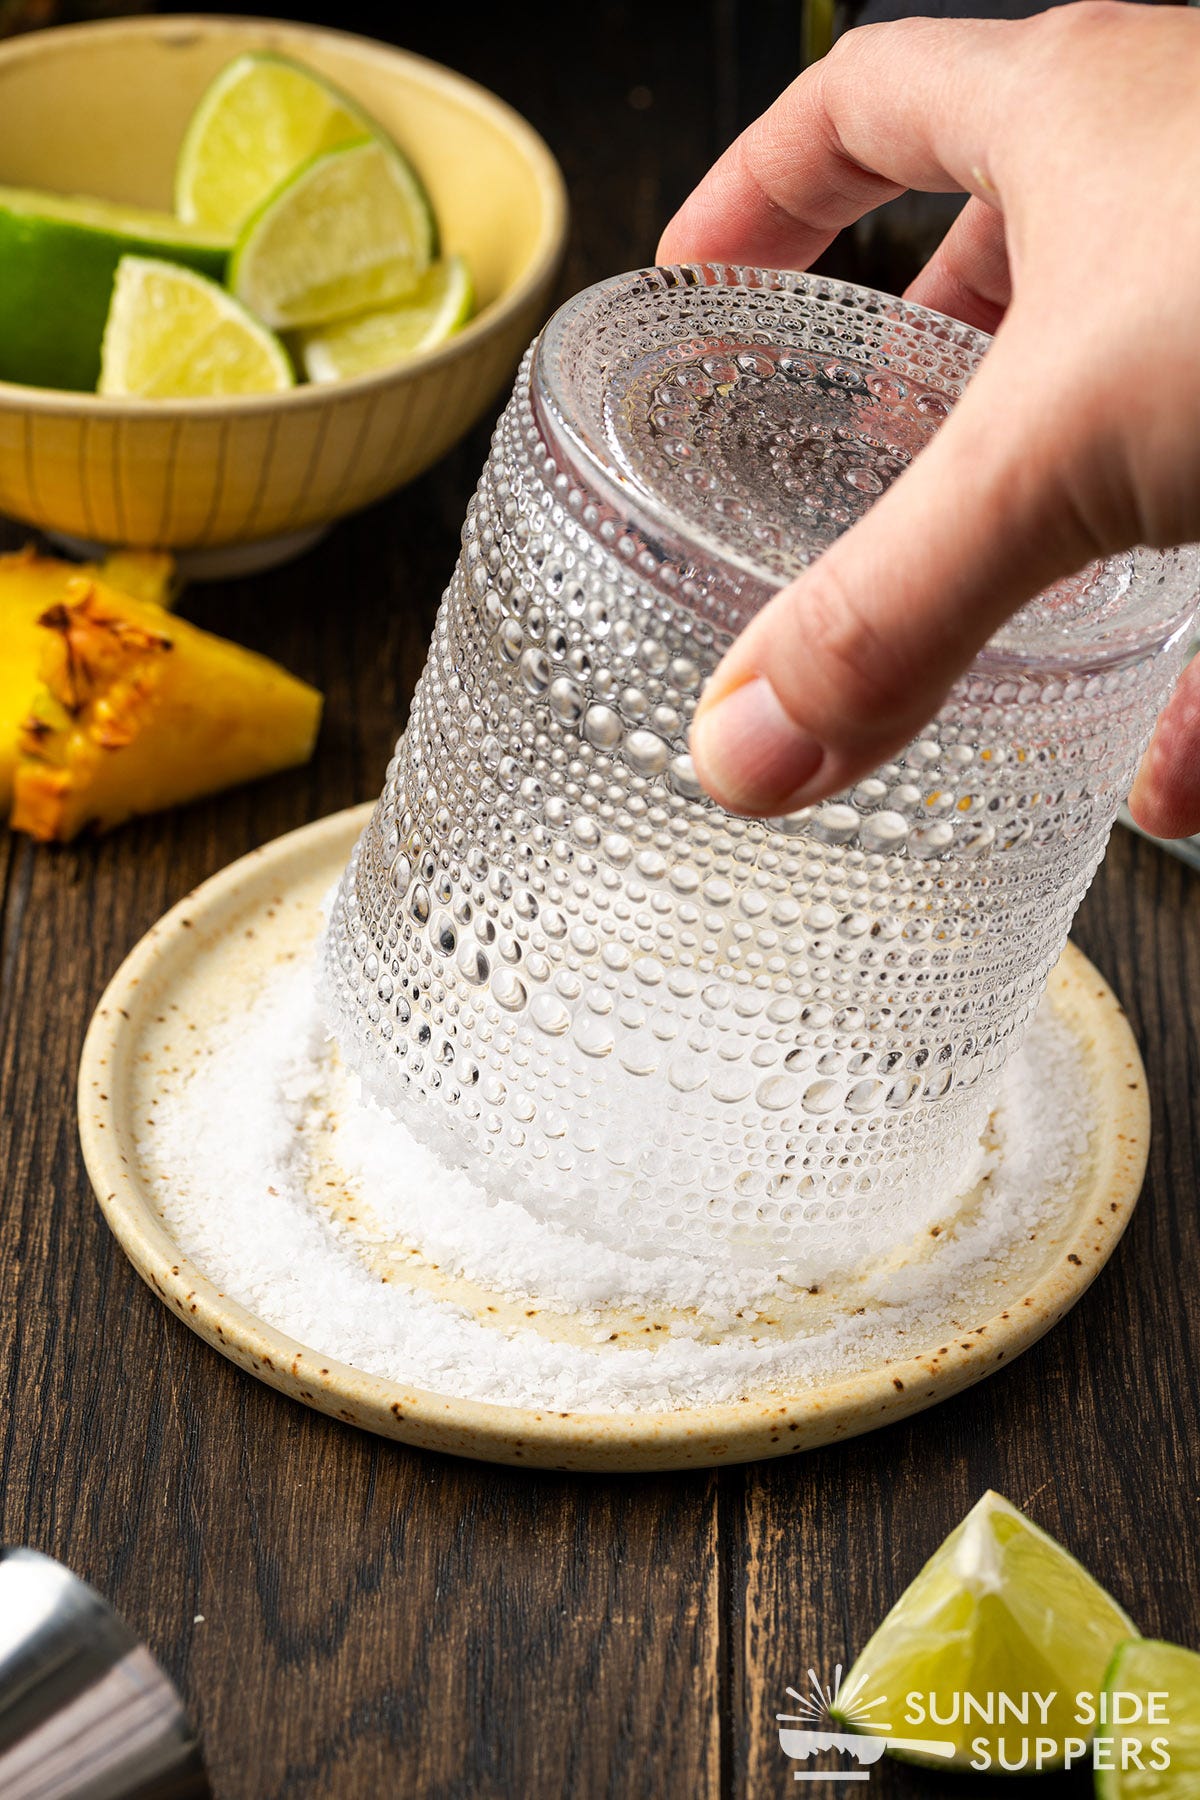 A hand pressing a cocktail a glass into a plate of salt.